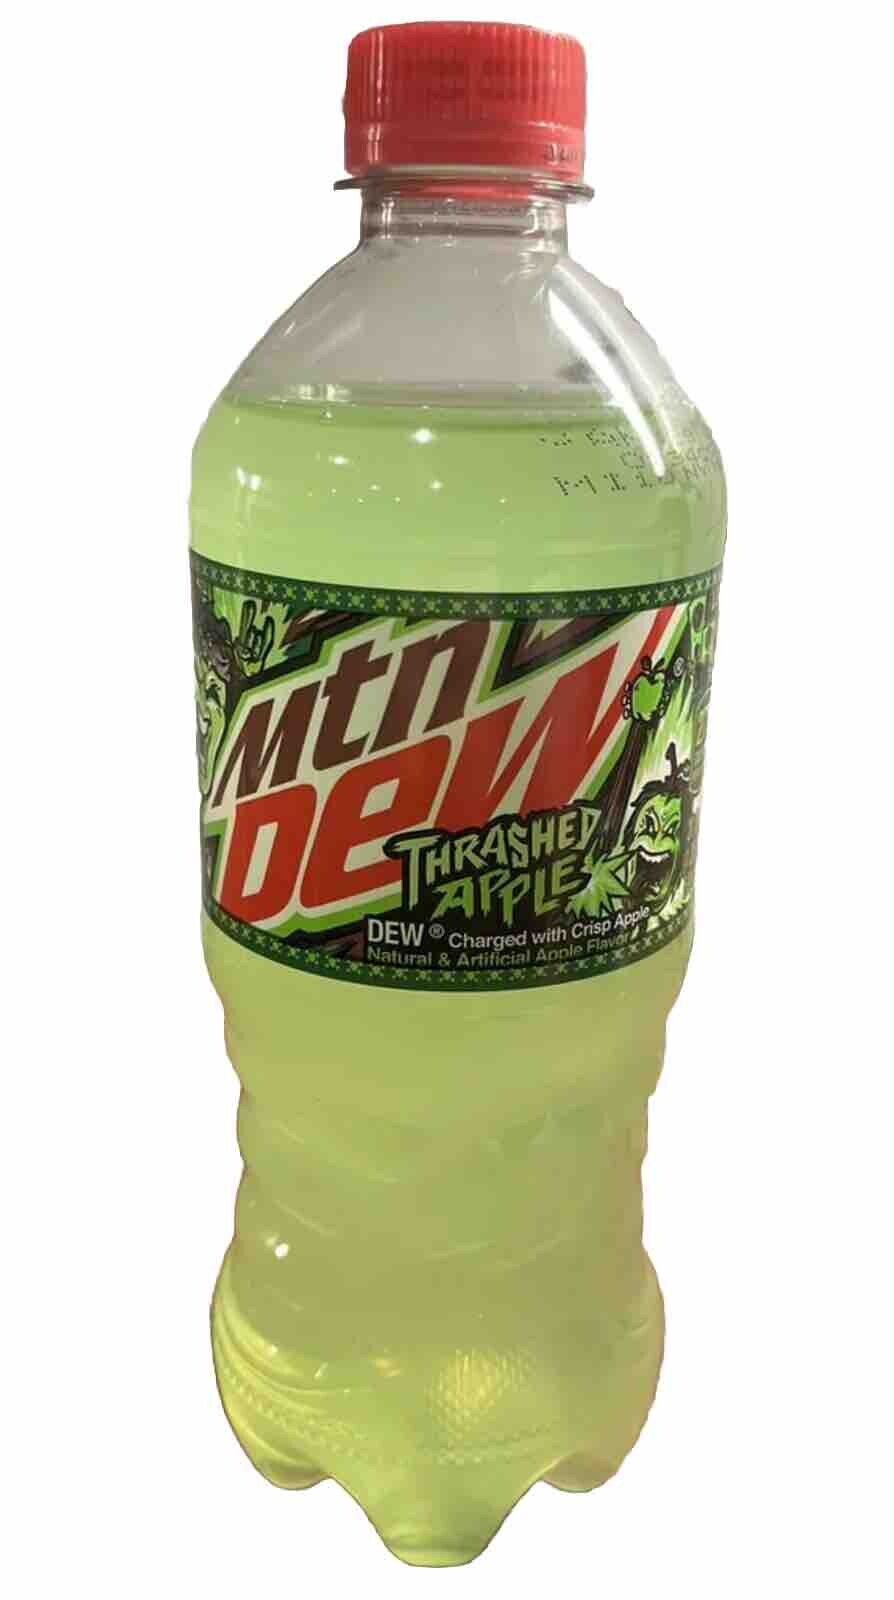 (3) FULL Mountain Dew Thrashed Apple 20 oz Bottles - Rare & Discontinued